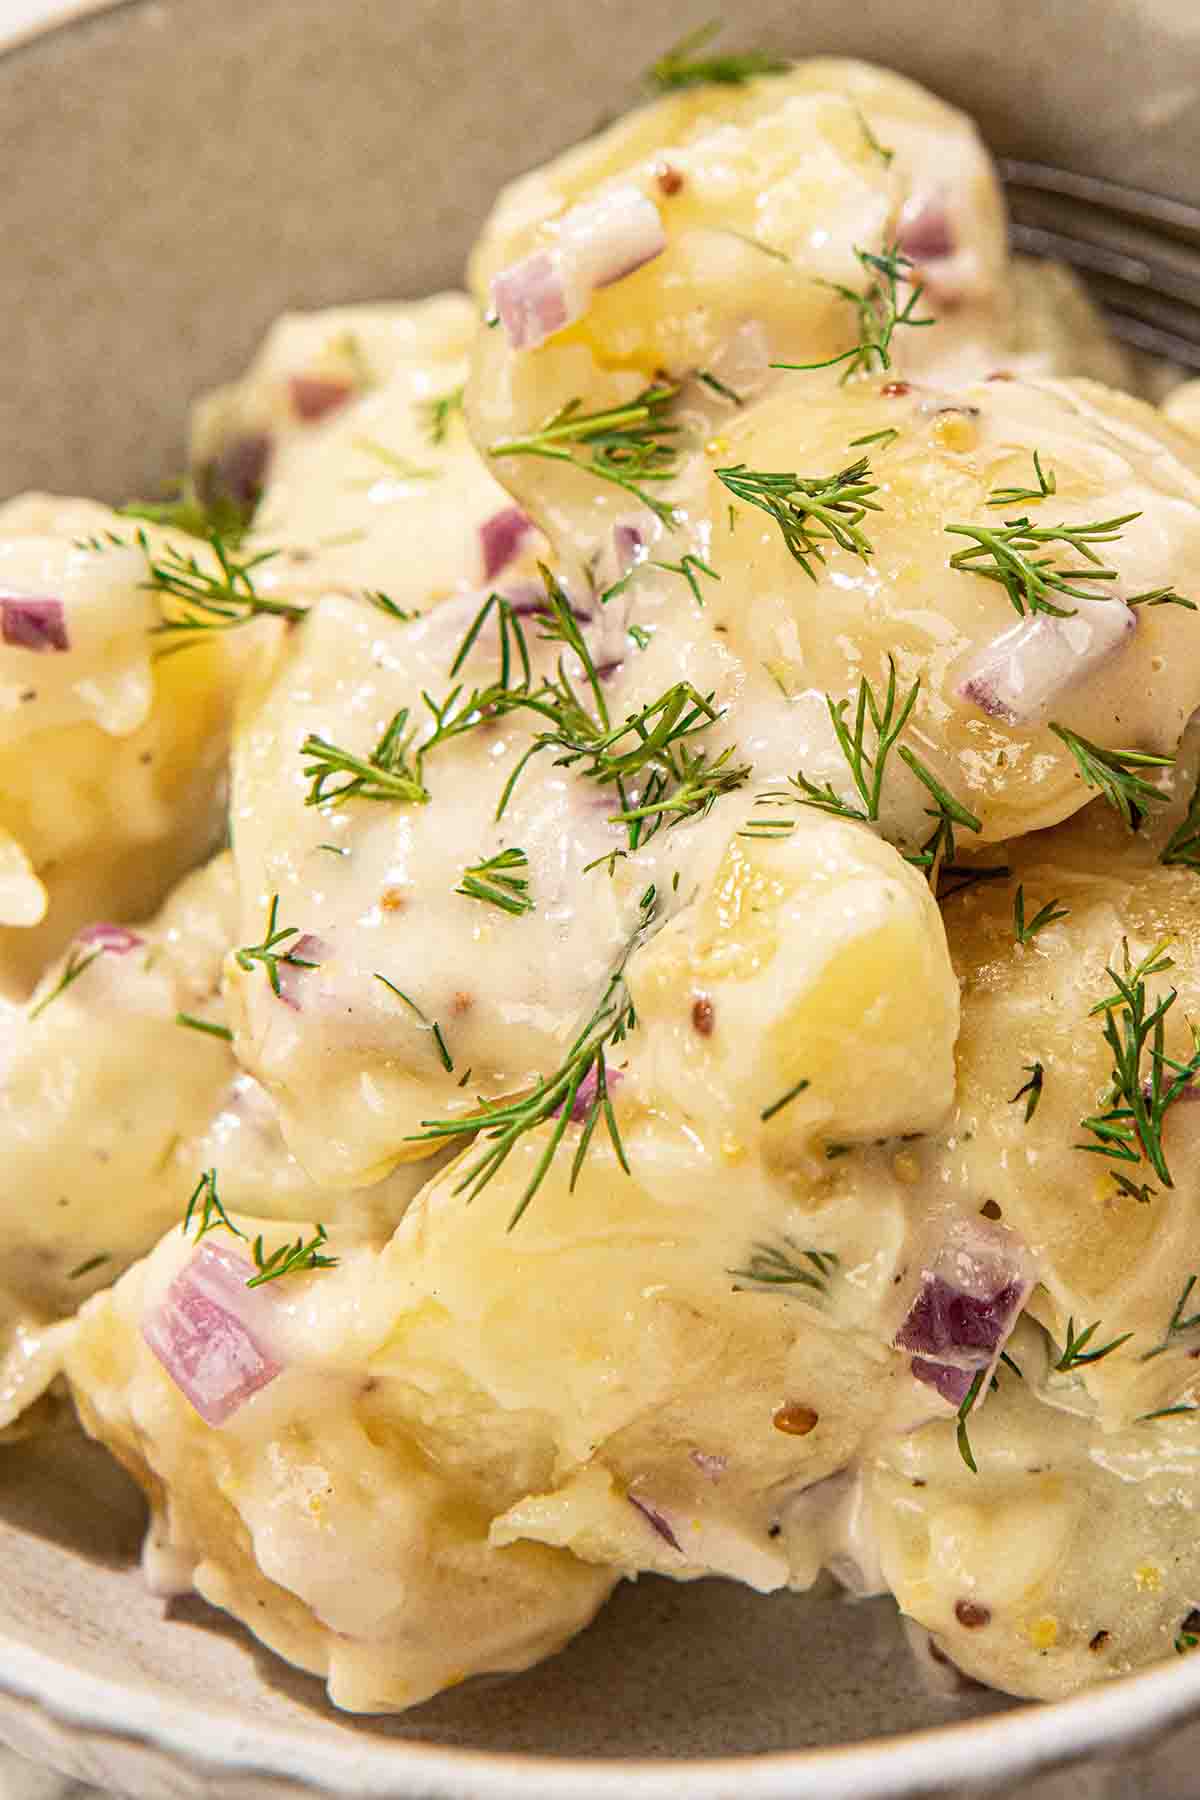 red potato salad with dill